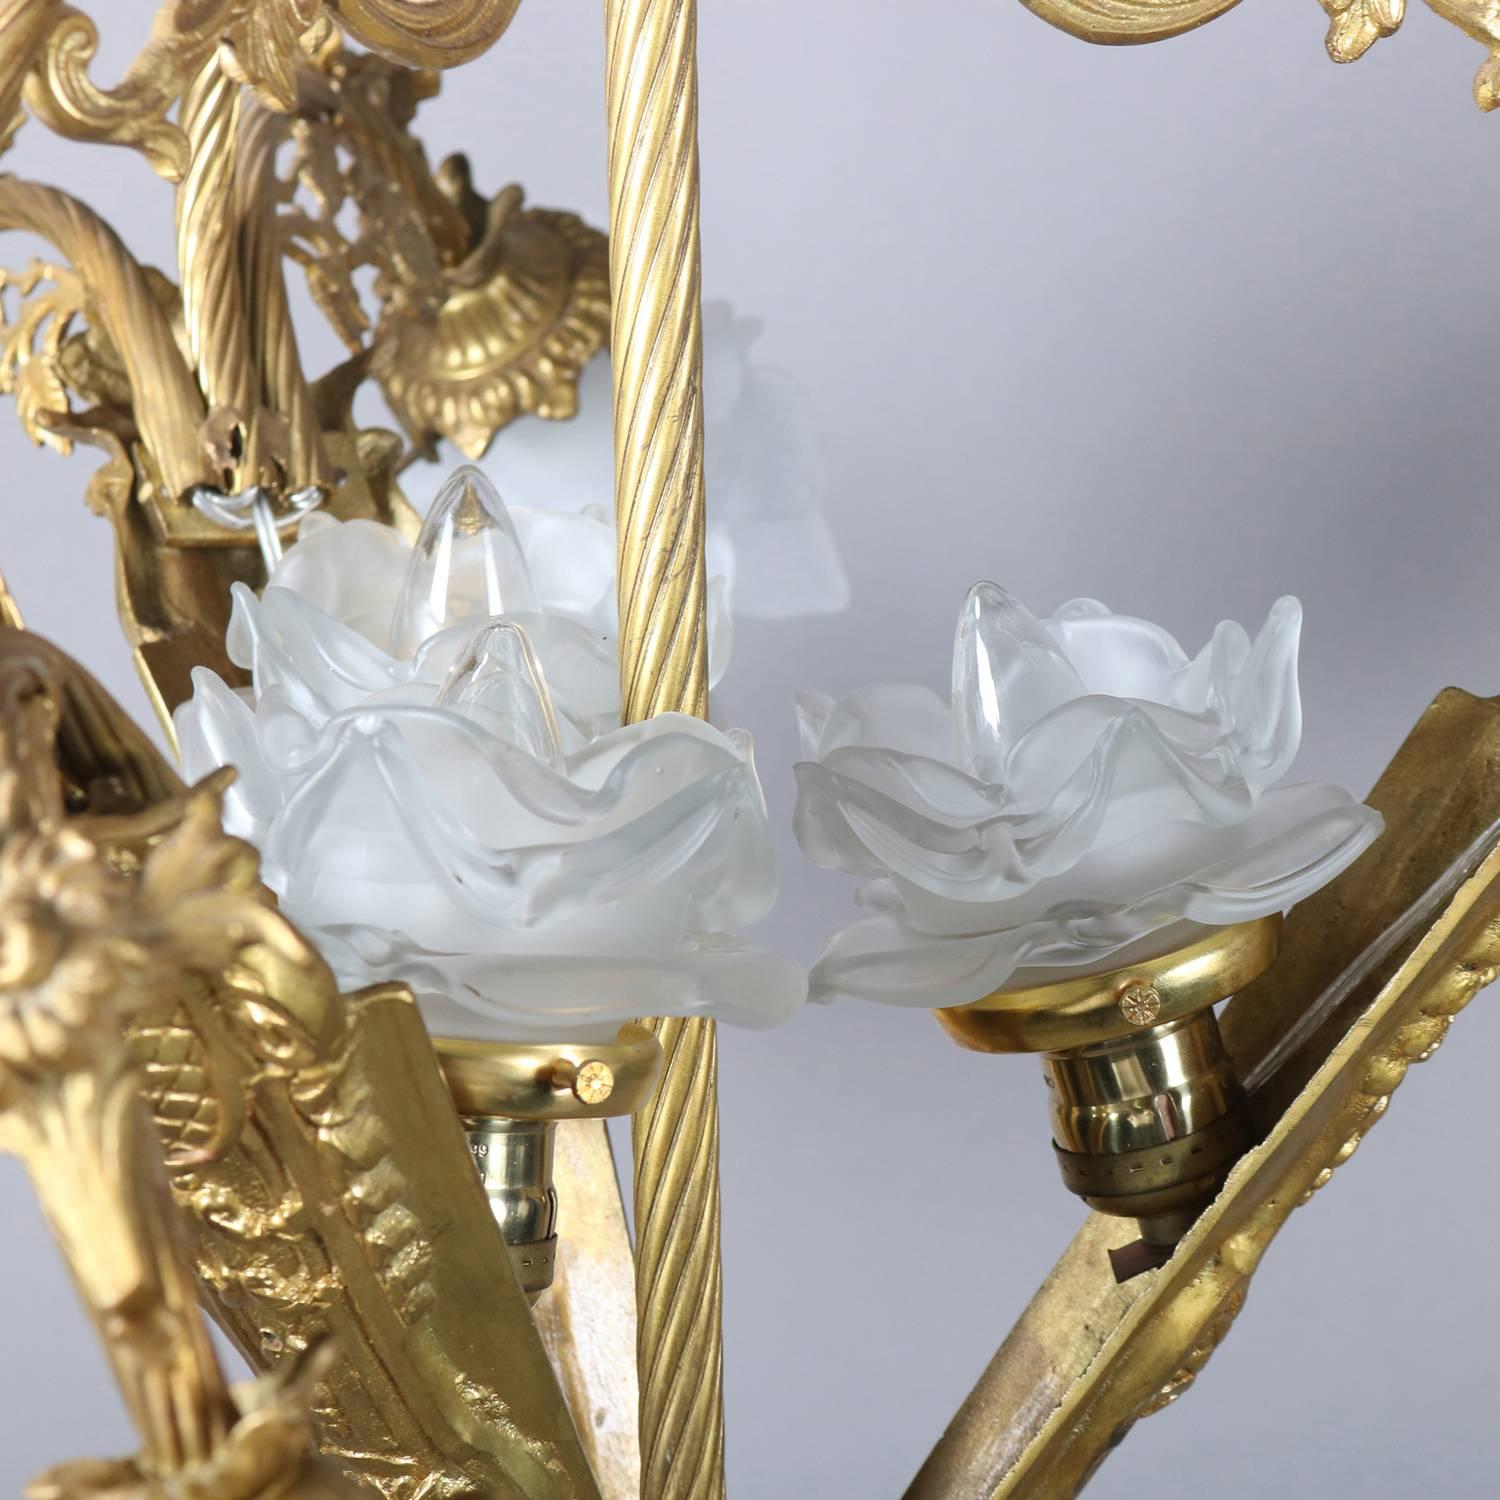 Vintage French Louis XIV style chandelier features gilt foliate form frame, nine arms terminating in lights with frosted molded floral form shades, newly re-wired, 20th century

***DELIVERY NOTICE – Due to COVID-19 we are employing NO-CONTACT